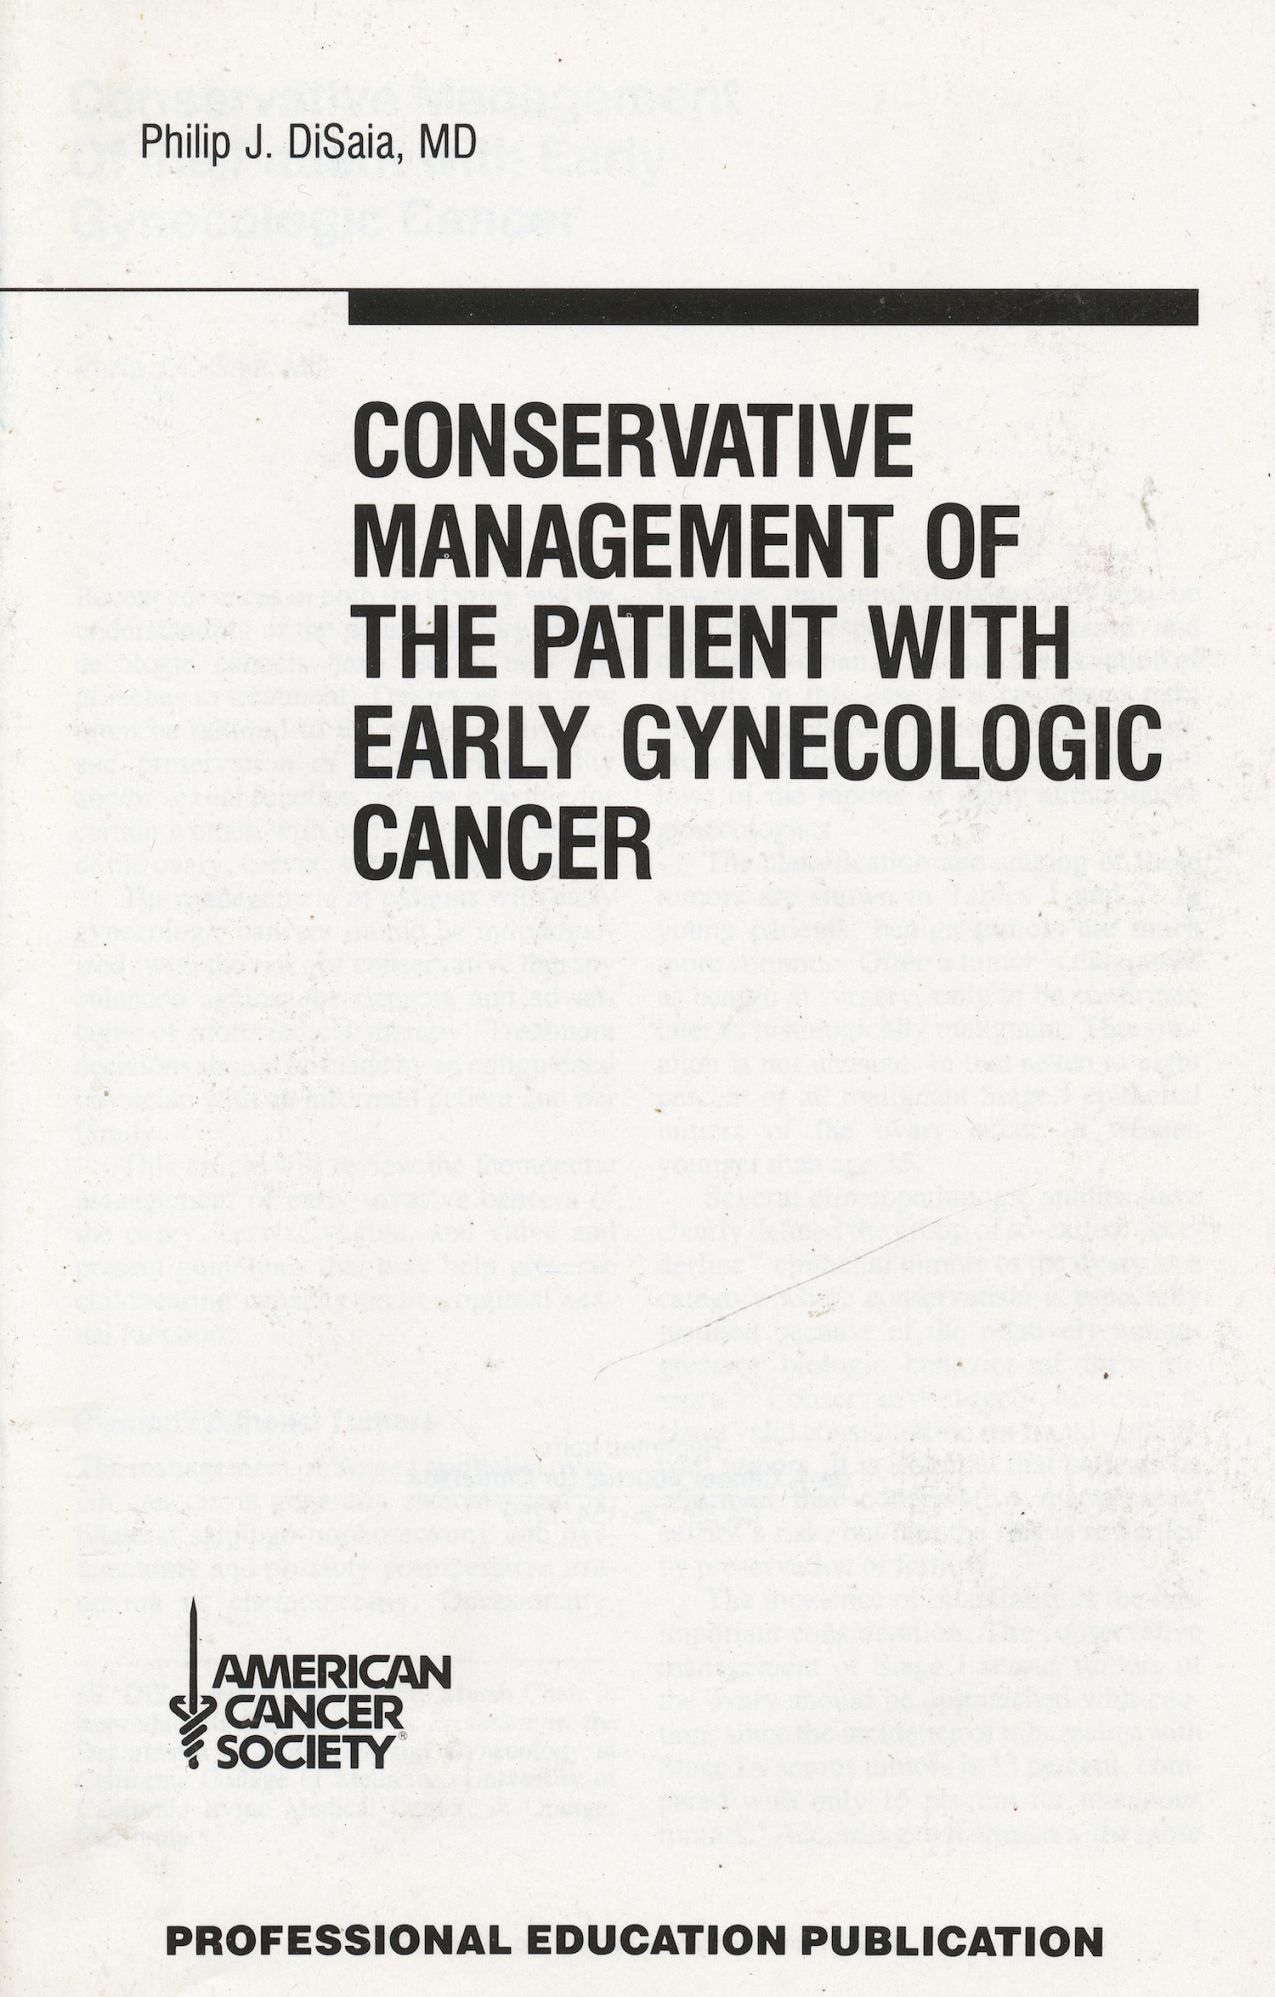 DISAIA, PHILIP - Conservative Management of the Patient with Early Gynecologic Cancer